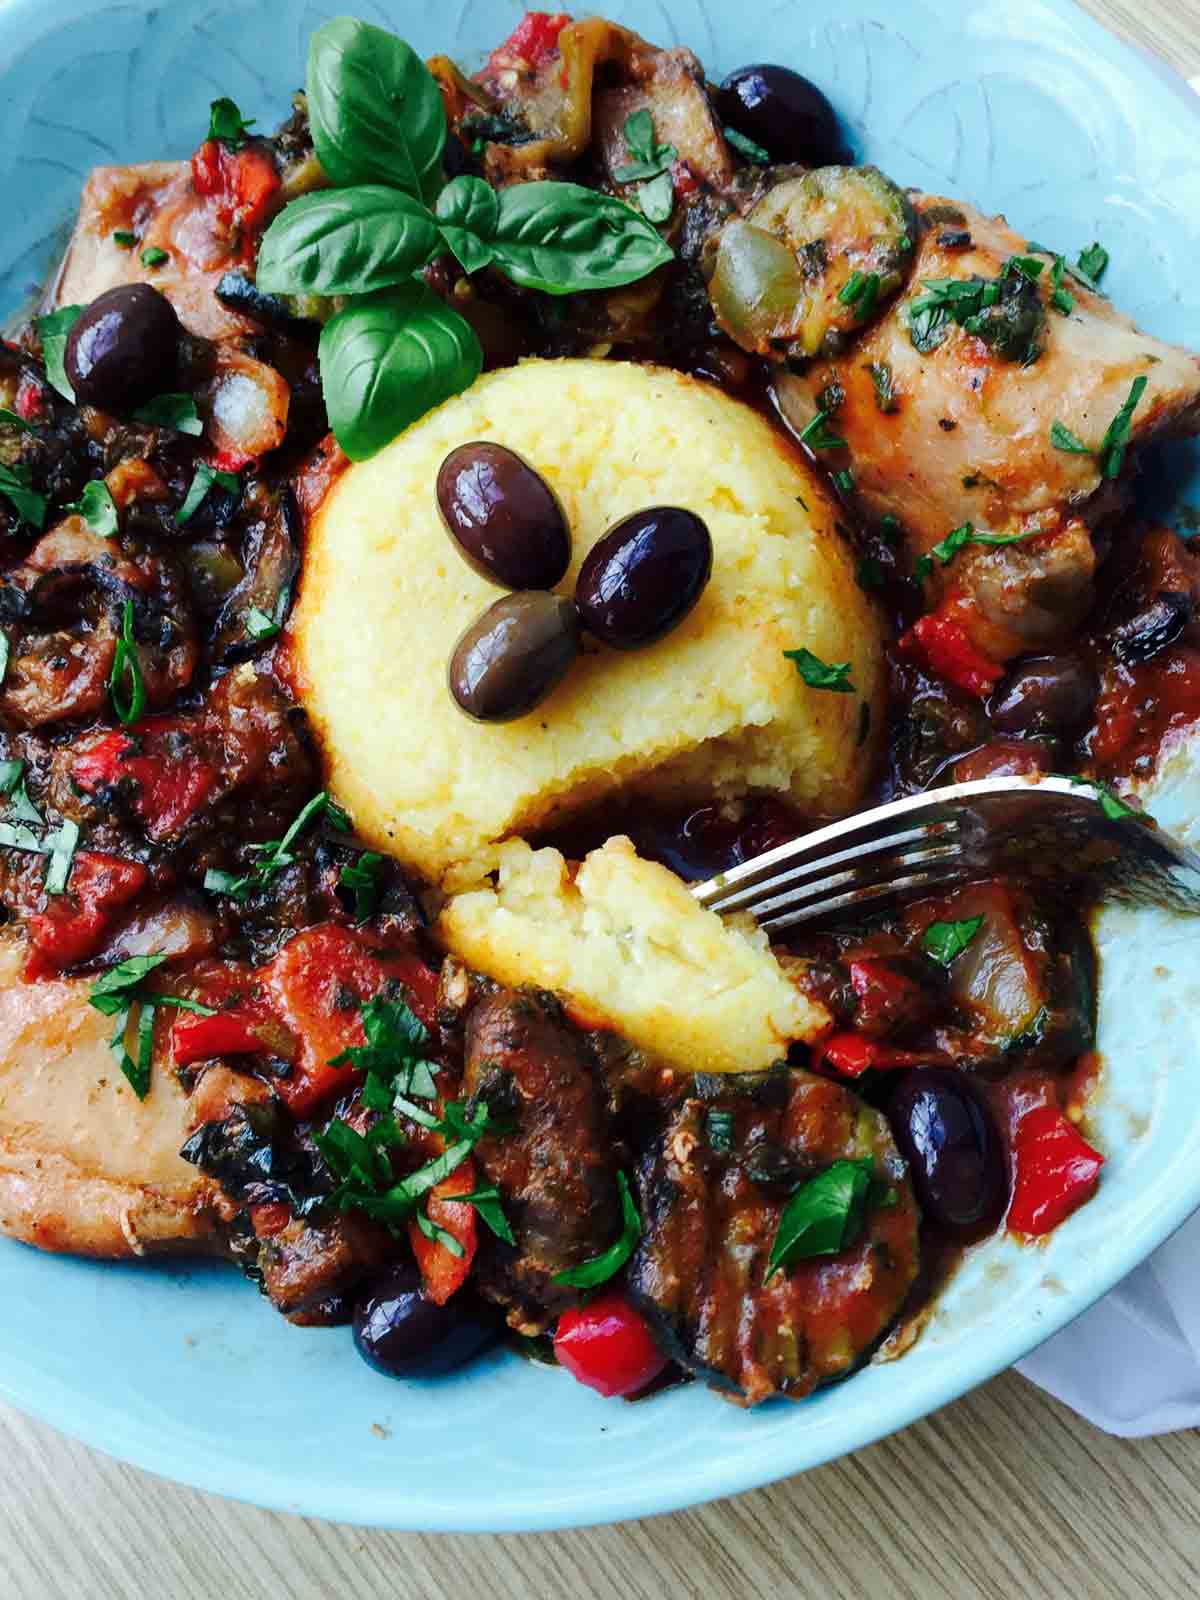 Try this scrumptious chicken casserole with mixed grilled veggies and polenta, a 'taste jackpot' for your taste buds.